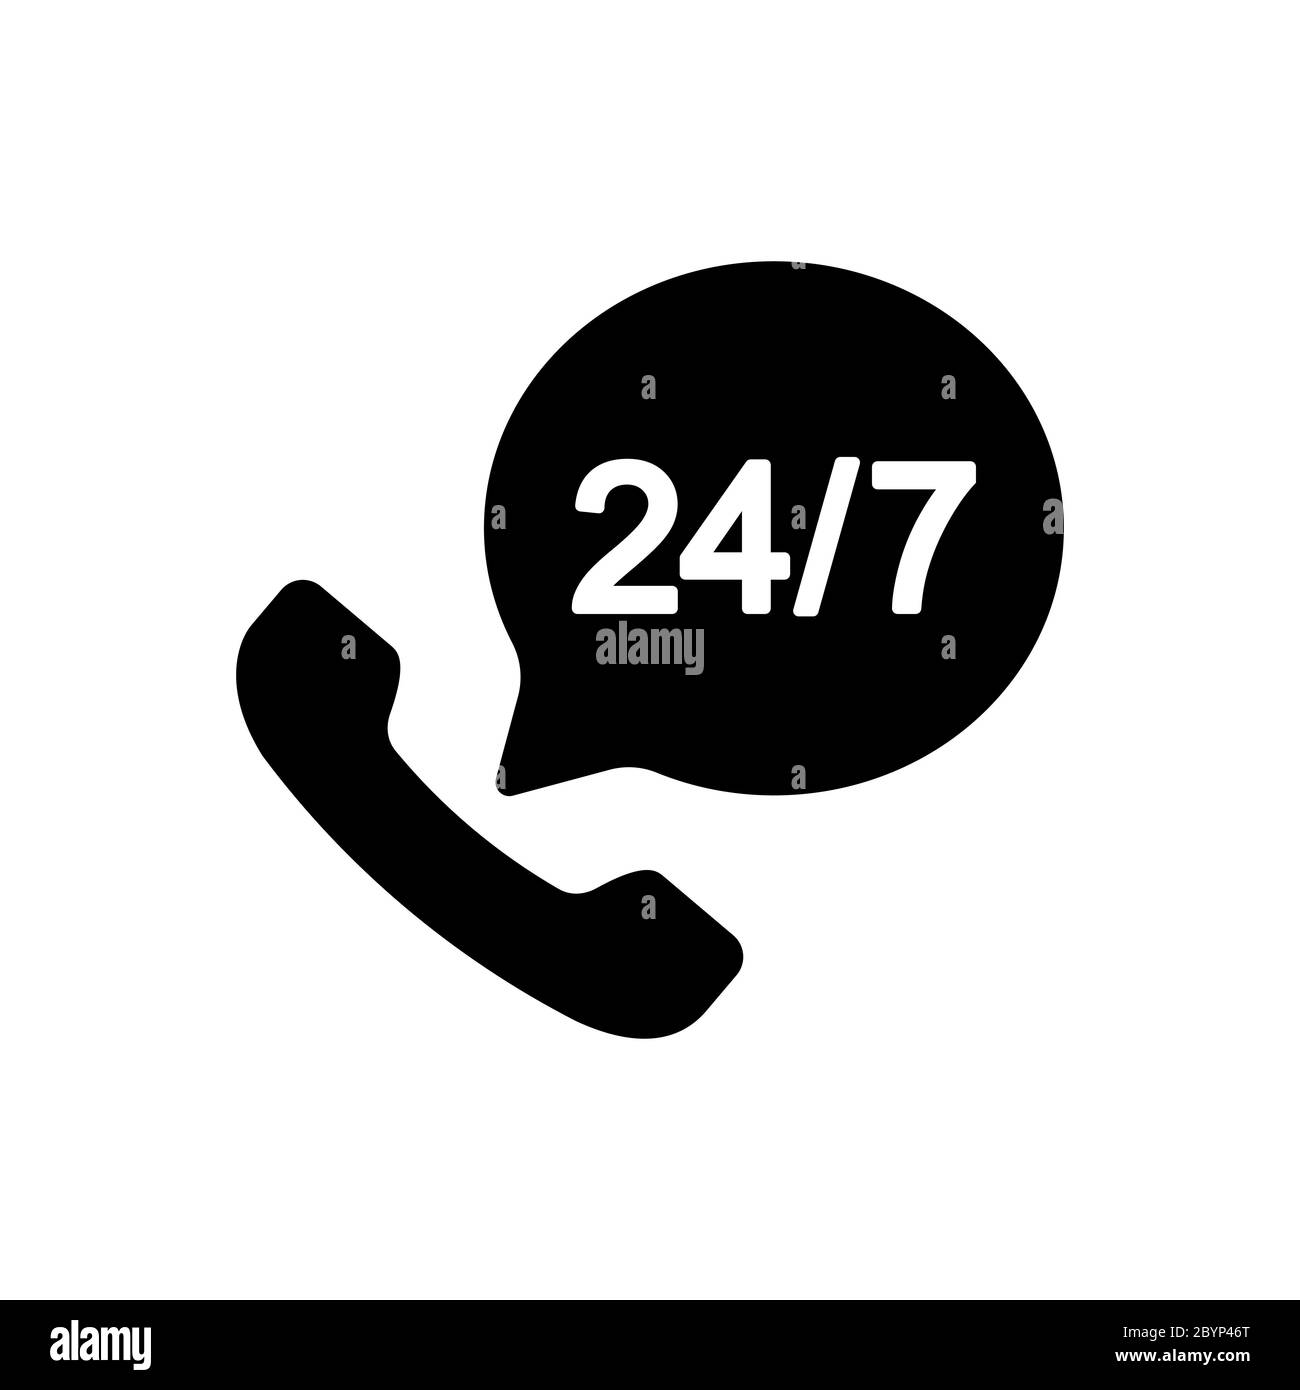 Call center support 24 7 vector icon in black on isolated white background. EPS 10 vector. Stock Vector